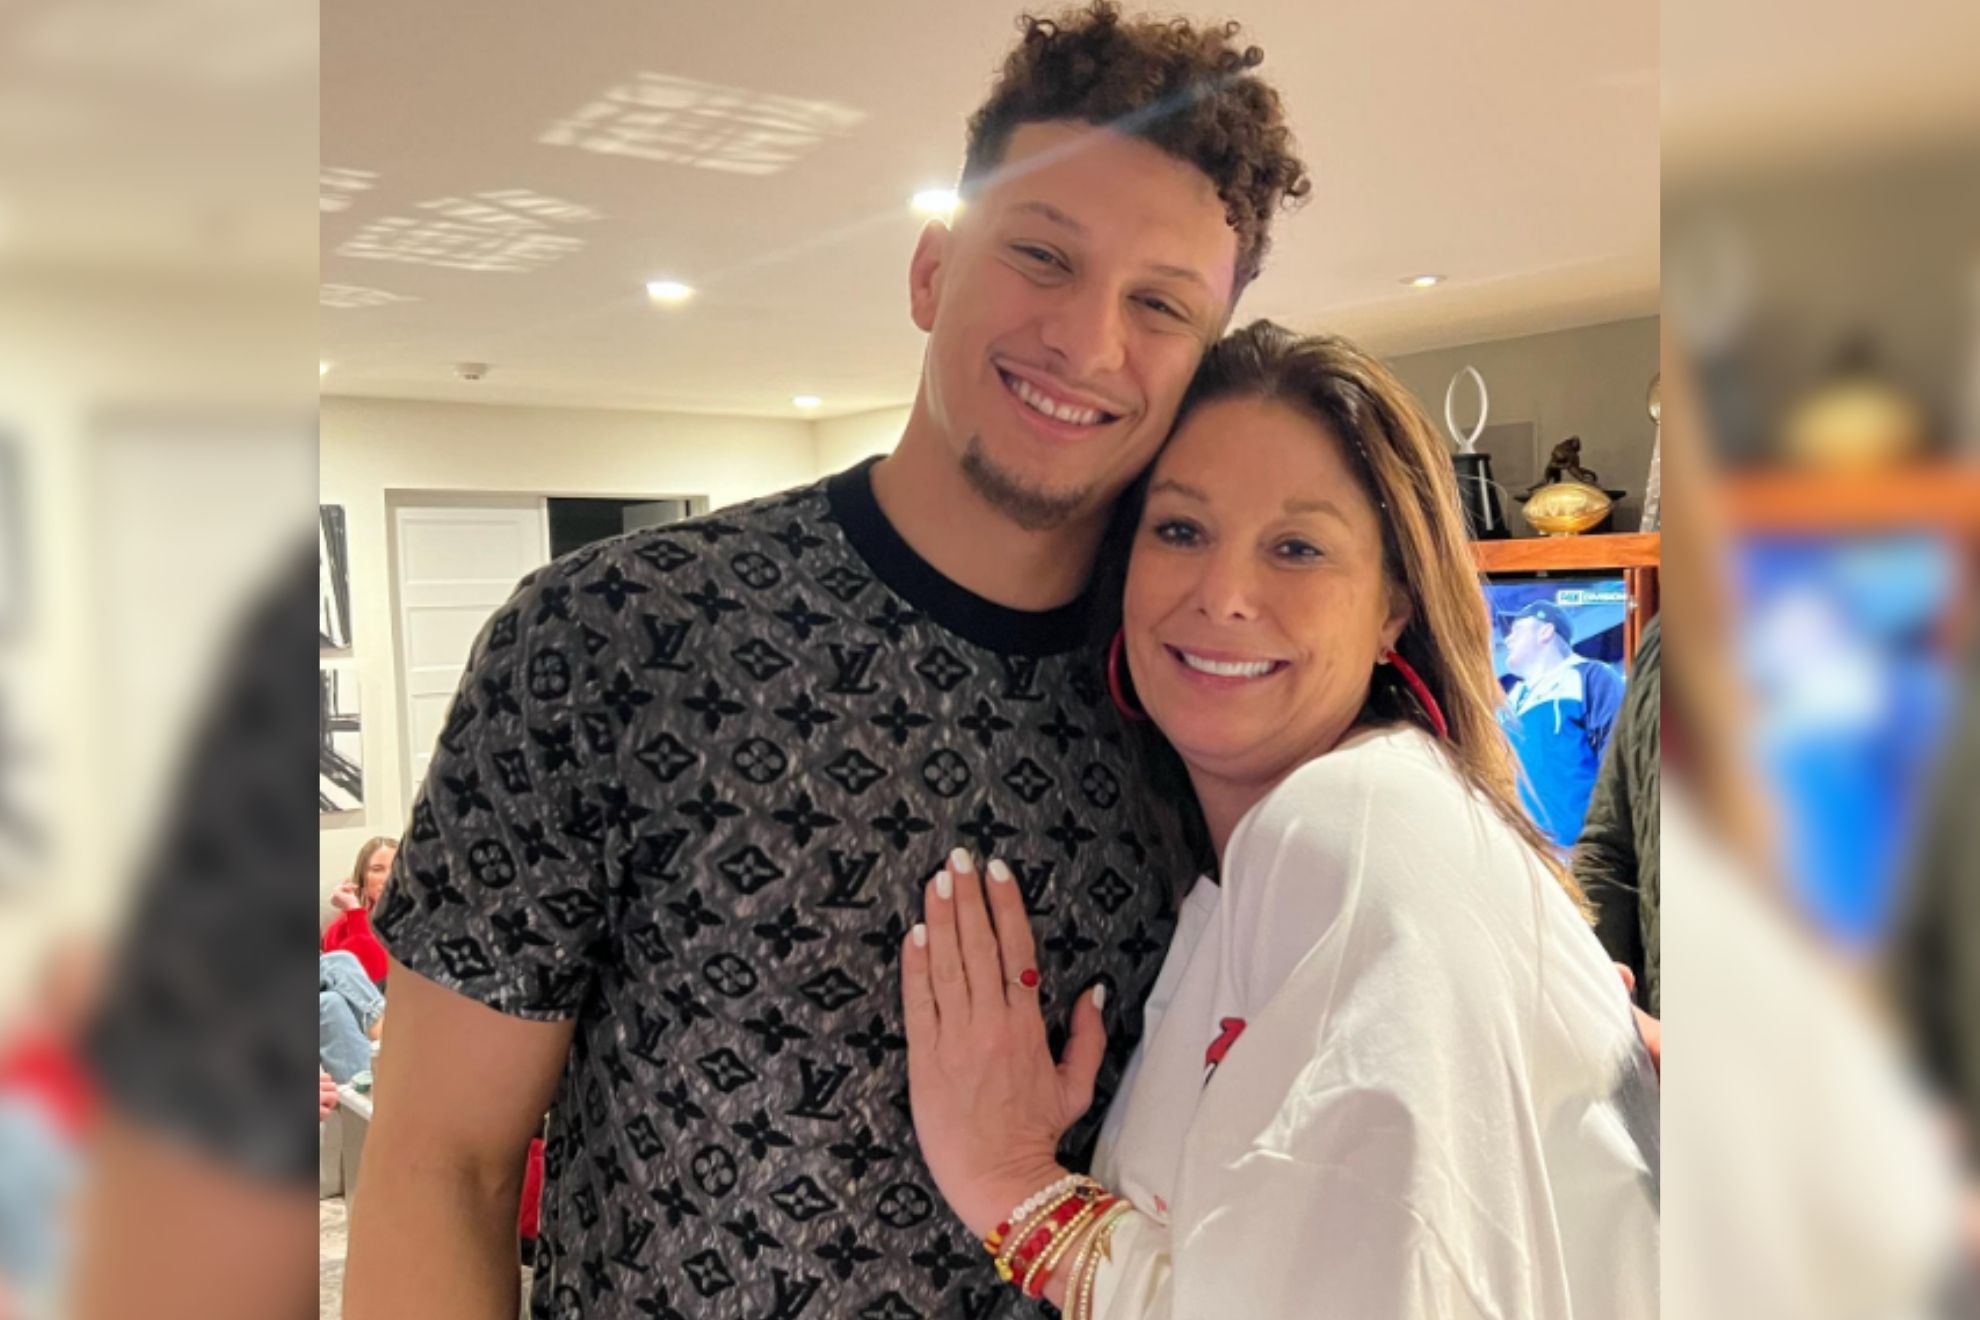 As I look back on my life, I owe you everything and then some. Today, we celebrate you. Happy birthday, mom! Patrick Mahomes Celebrates Mom 51st Birthday, Shares Stunning Video